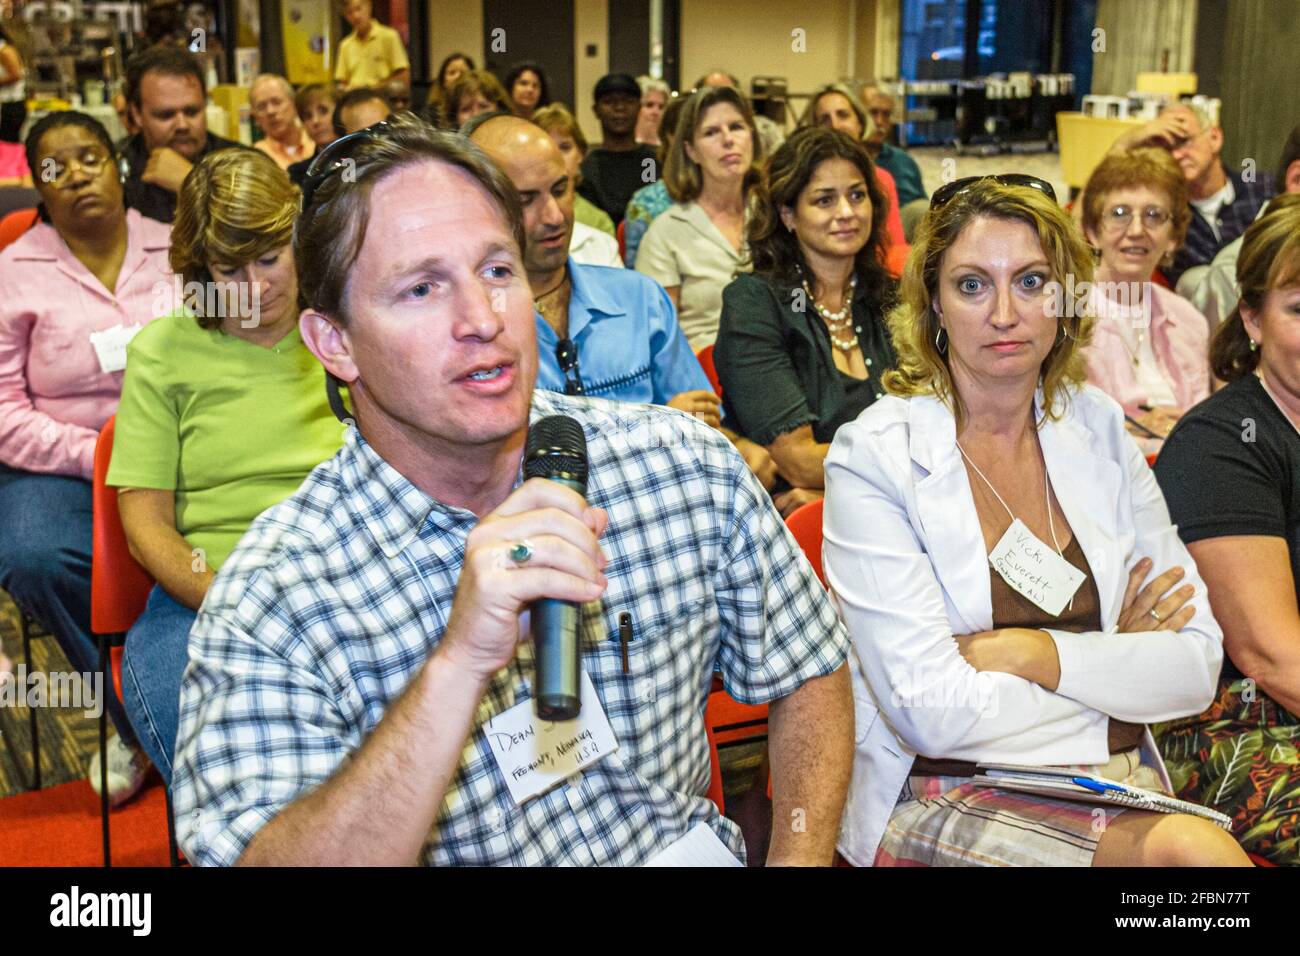 Orlando Florida,Central Avenue Public Library,guest speaker event audience man asking question holding microphone, Stock Photo